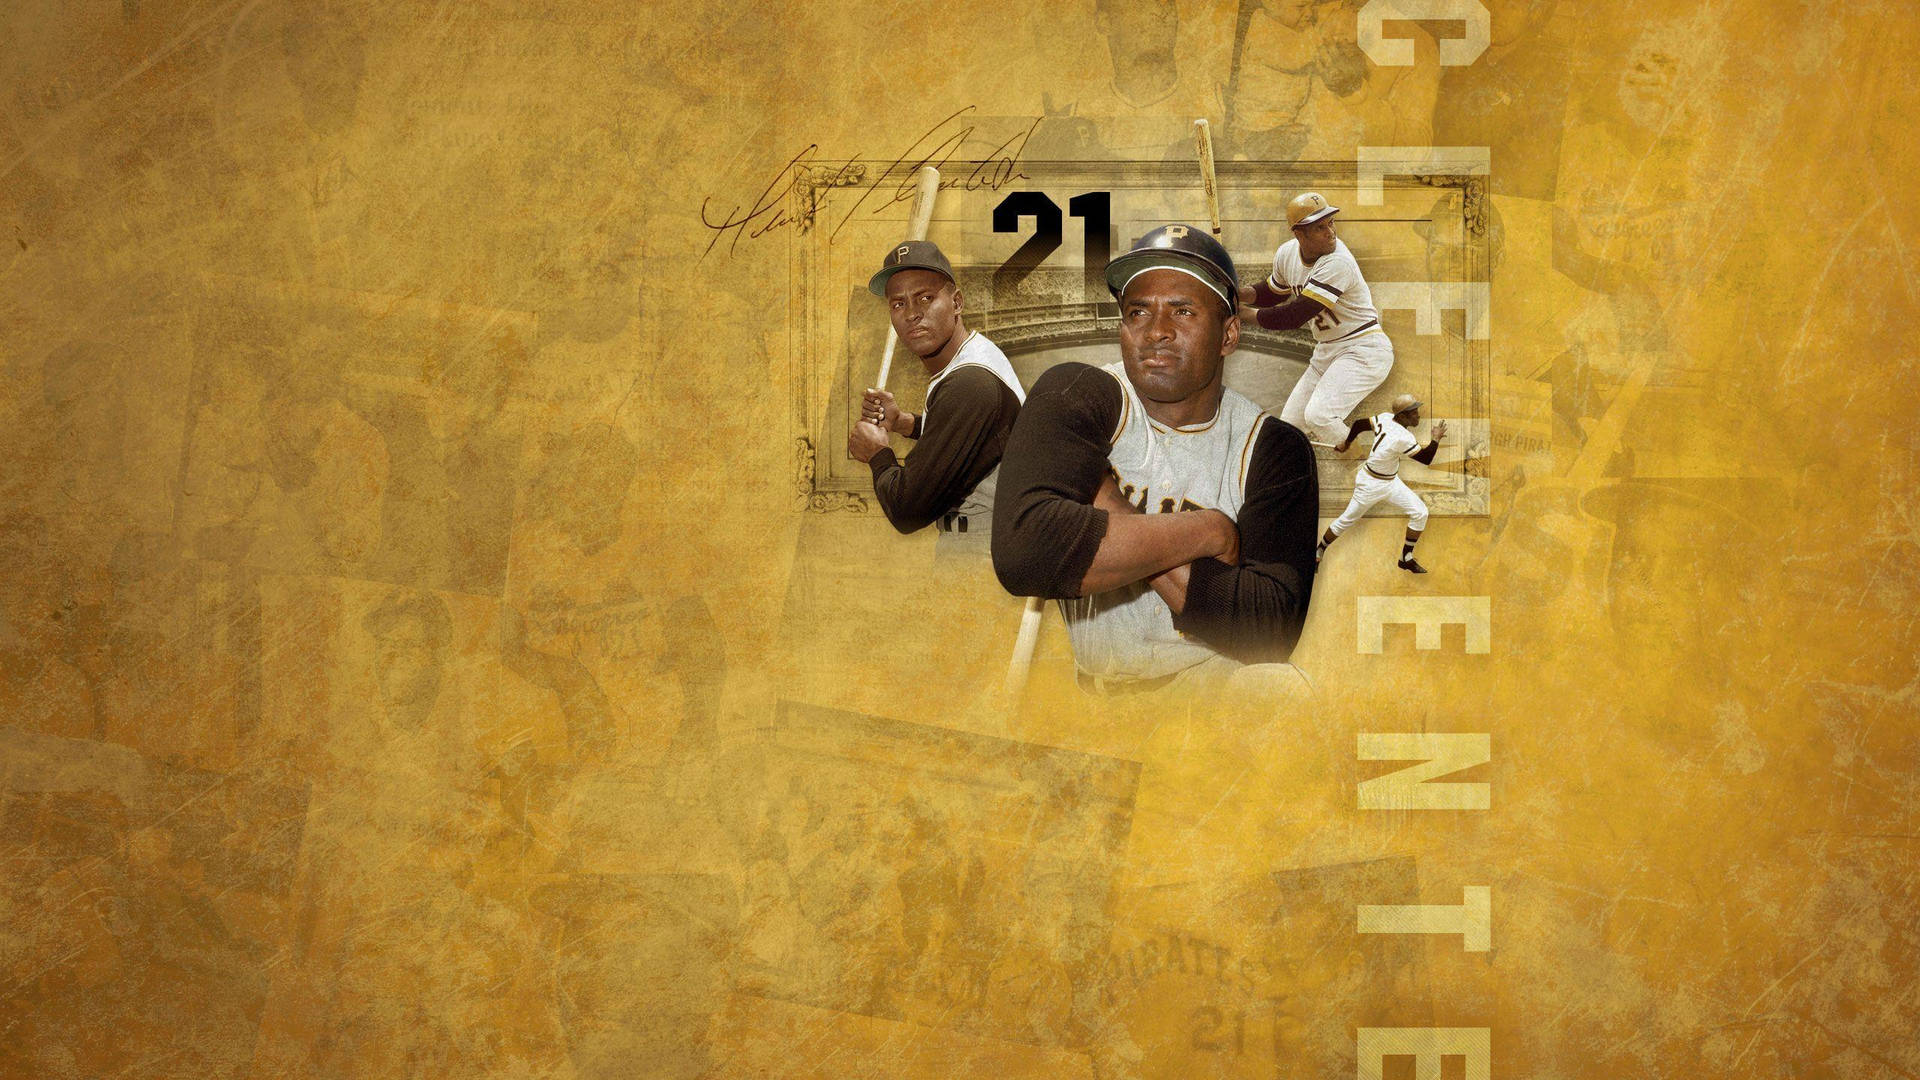 Roberto Clemente Aesthetic Poster Background